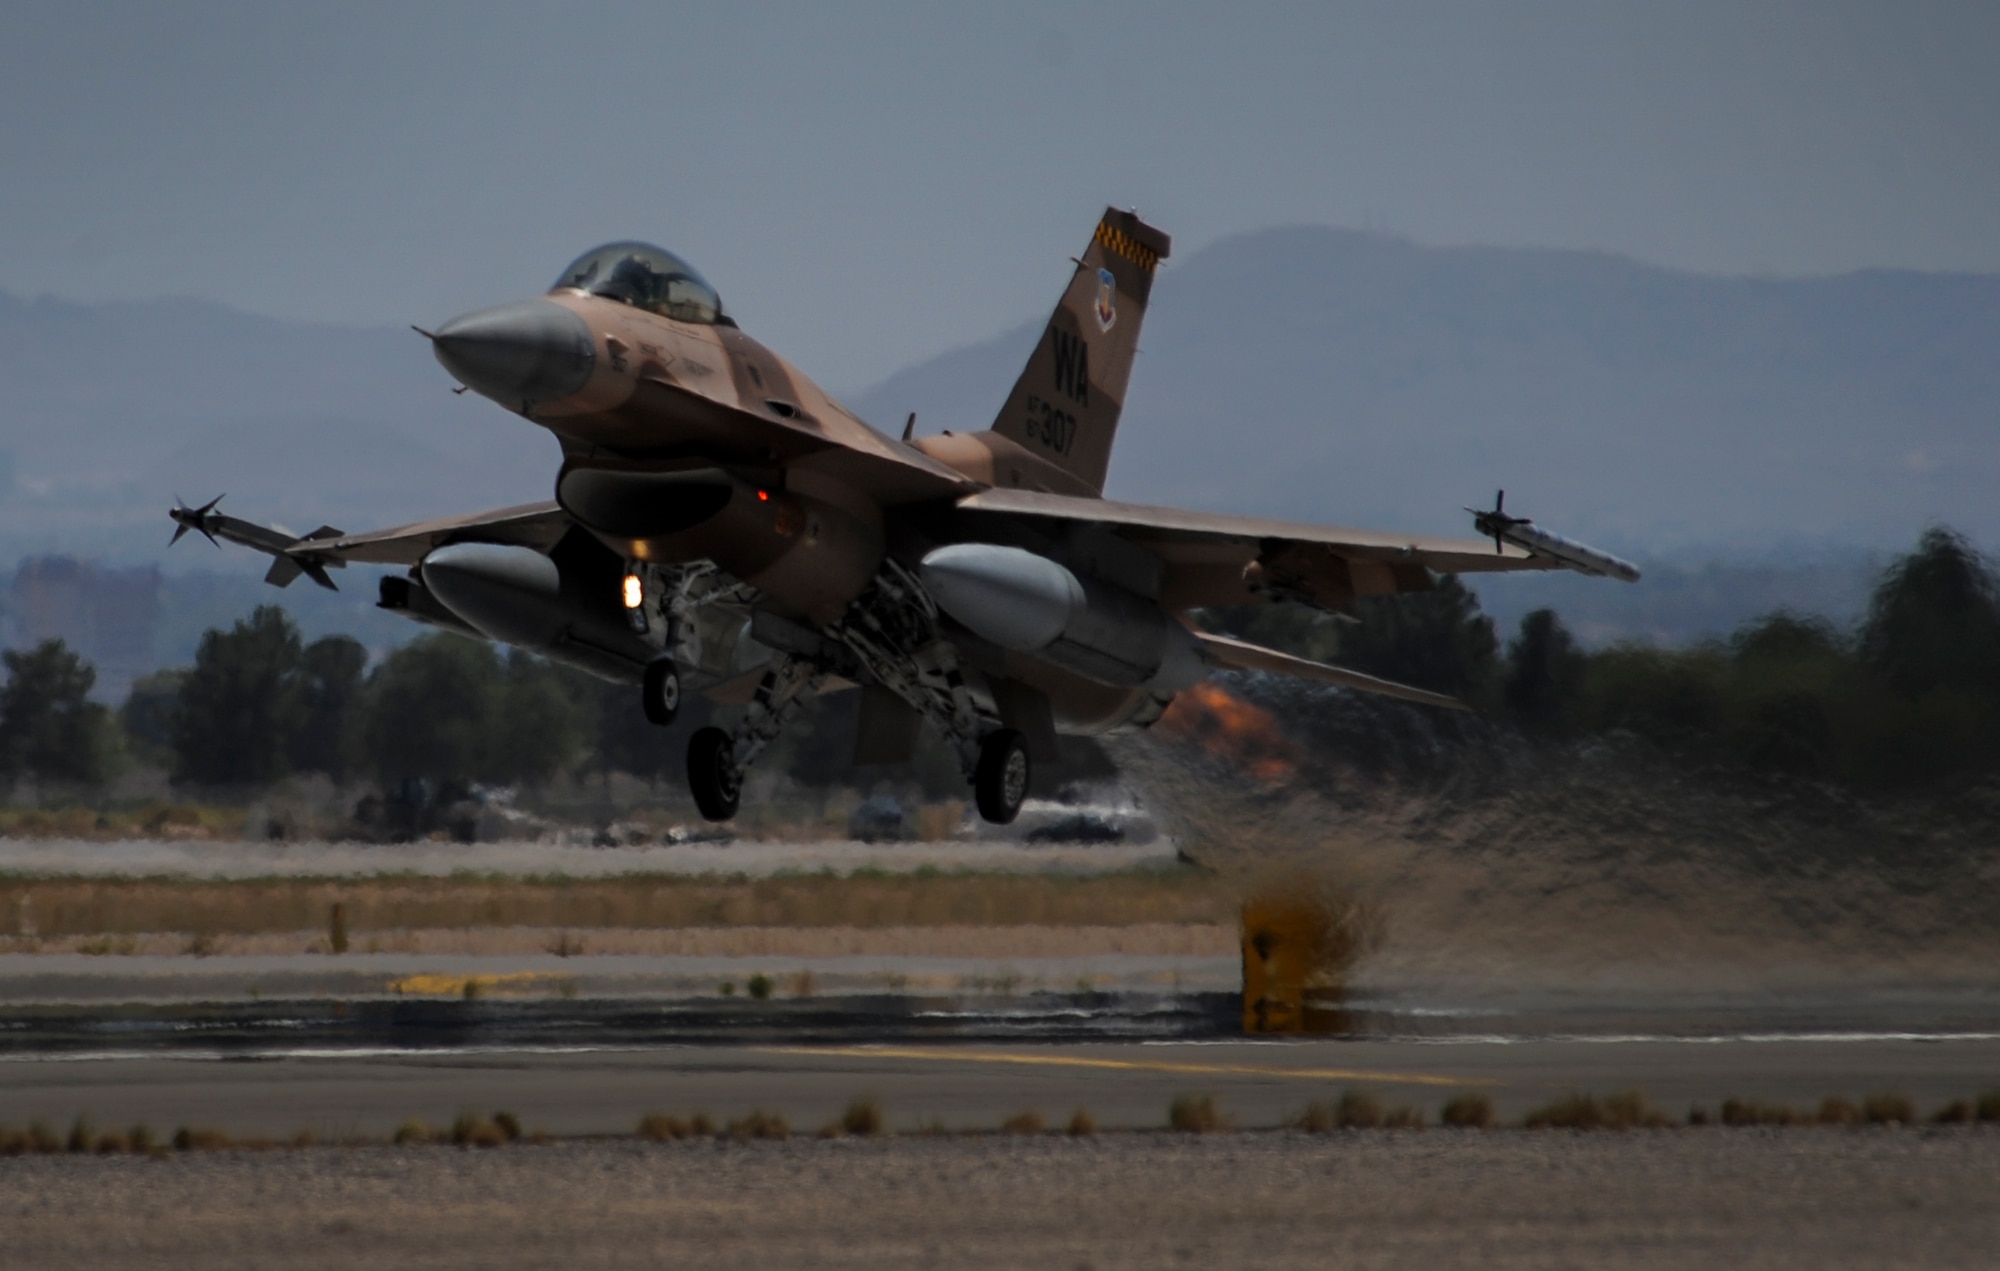 An F-16 Fighting Falcon, assigned to the 64th Aggressor Squadron, takes off during the first day of Red Flag 16-3 at Nellis Air Force Base, Nev., July 11, 2016. The 64th AGRS plays a critical role as the opposing force during Red Flag by providing combat air forces from around the world challenges to prepare for future conflicts of war. (U.S. Air Force photo by Airman 1st Class Kevin Tanenbaum)